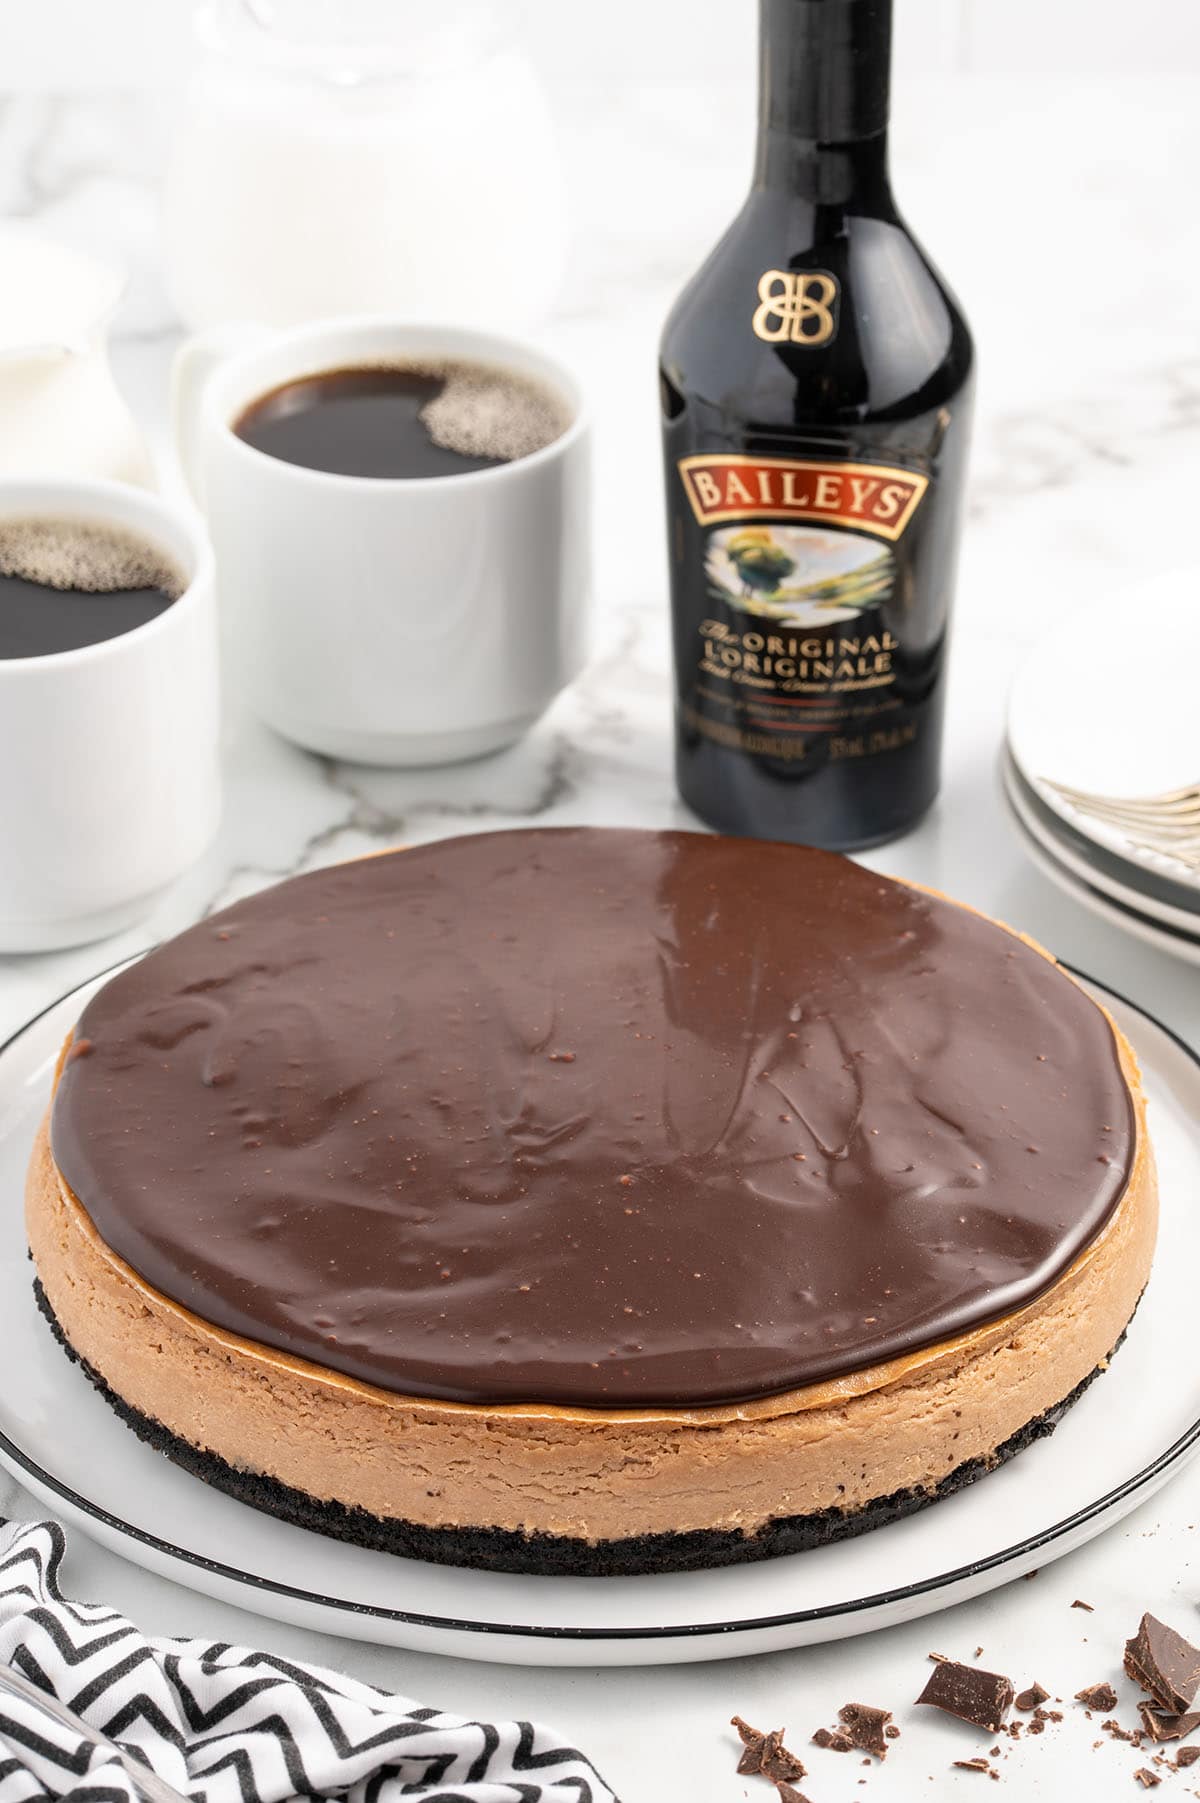 whole Bailey's Cheesecake on a white plate and 2 glasses of black coffee on the background.